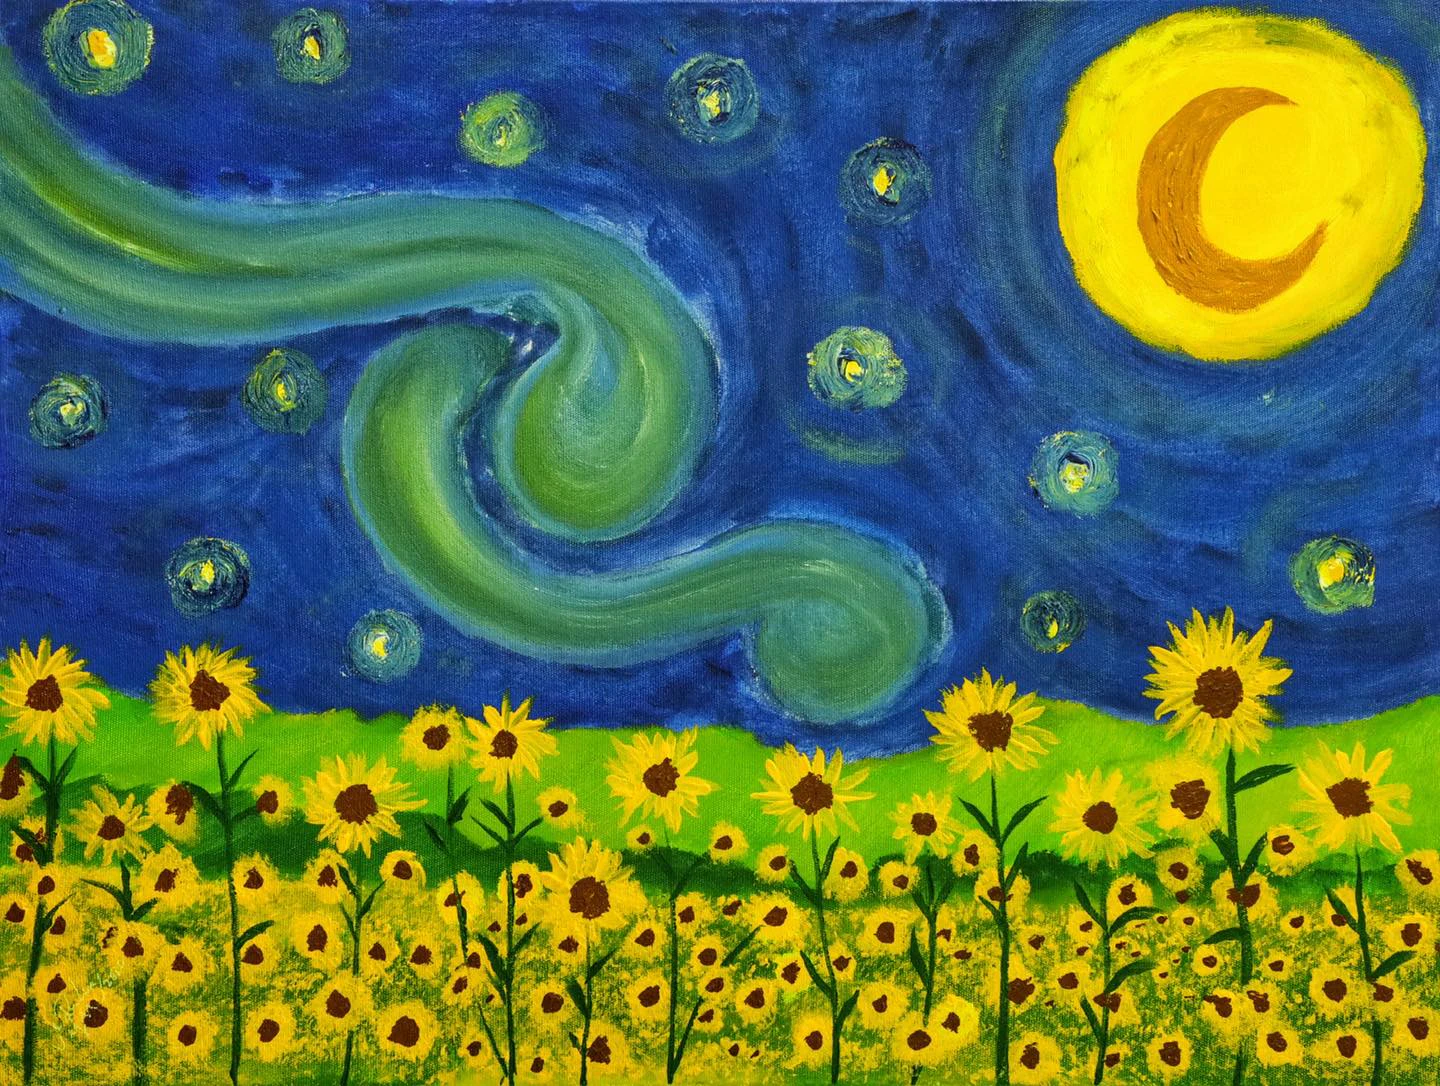 Sunflowers under the starry sky